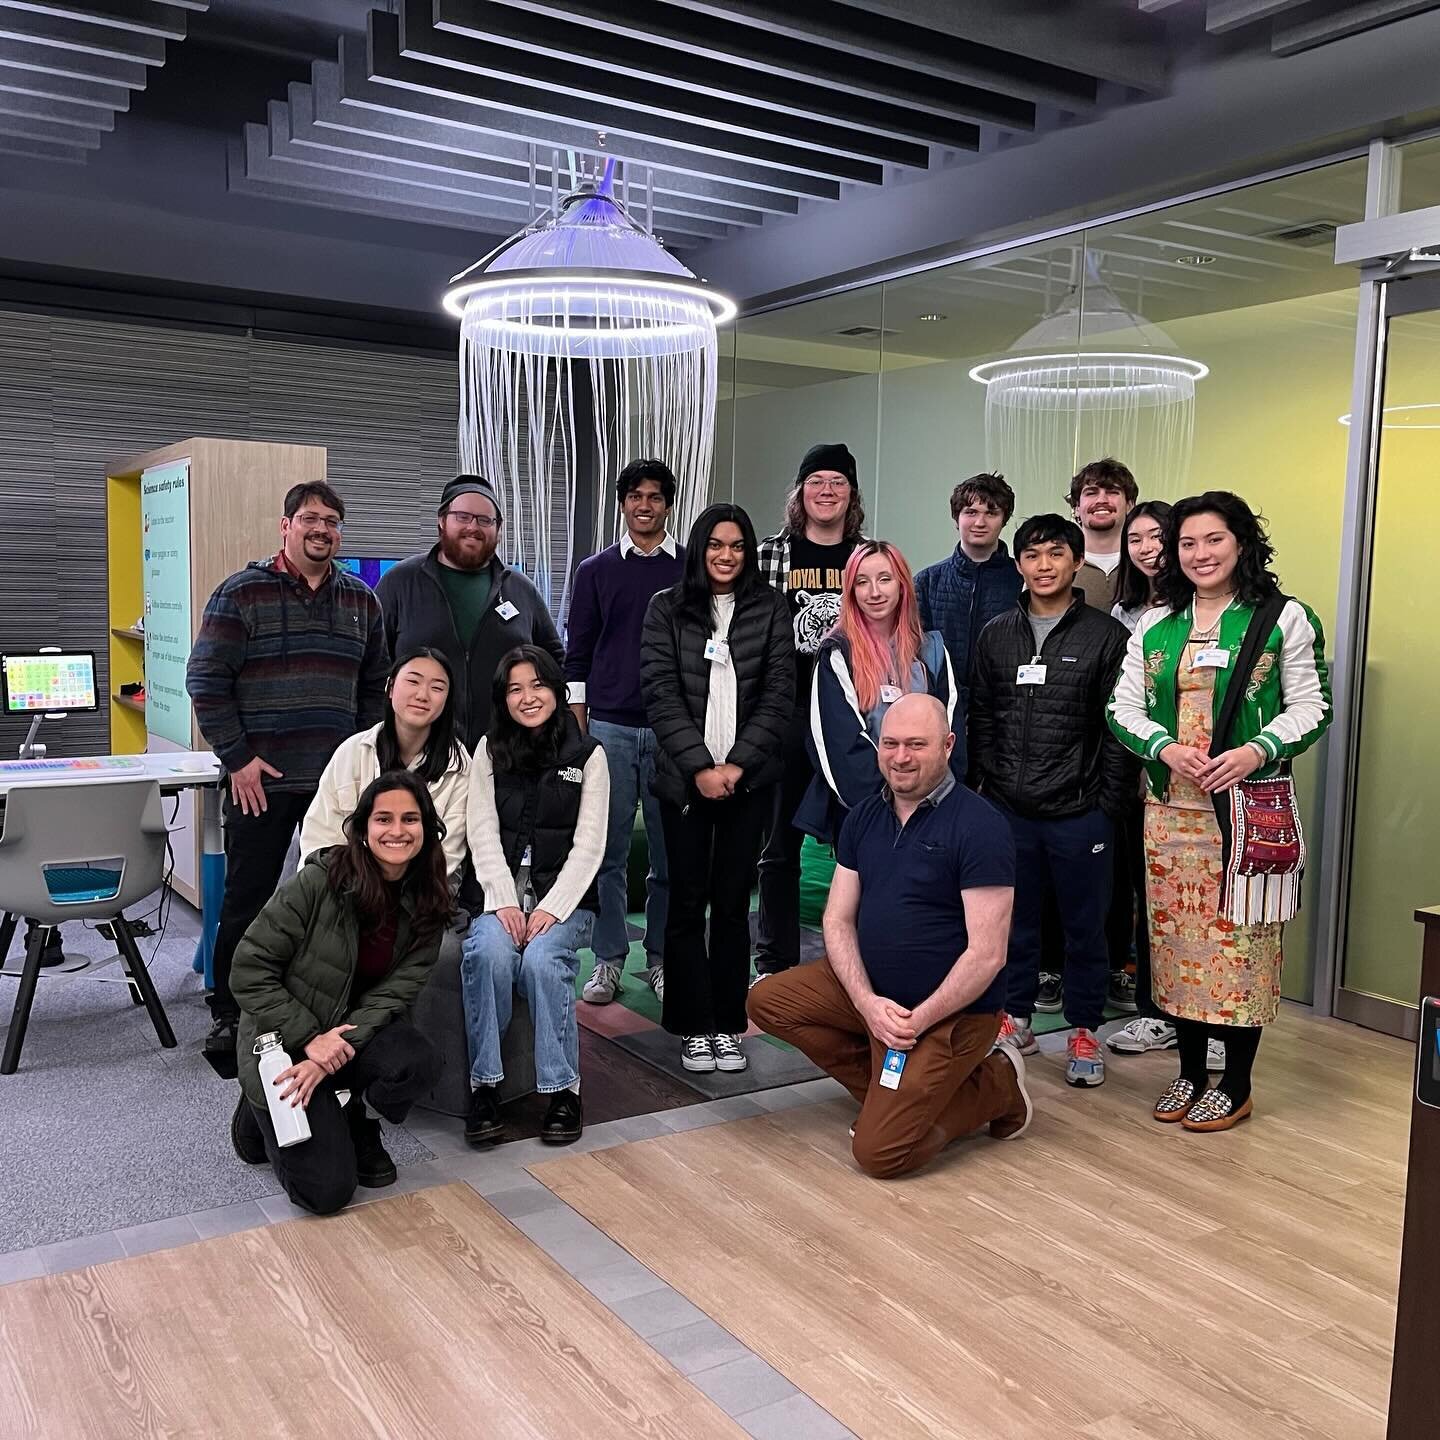 A couple weeks ago, the design teams toured Microsoft&rsquo;s Advanced Prototyping Center and Inclusive Technology Lab, where they learned about the intersections between accessibility and industry. Thank you Eric Roth and Solomon Romney for hosting 